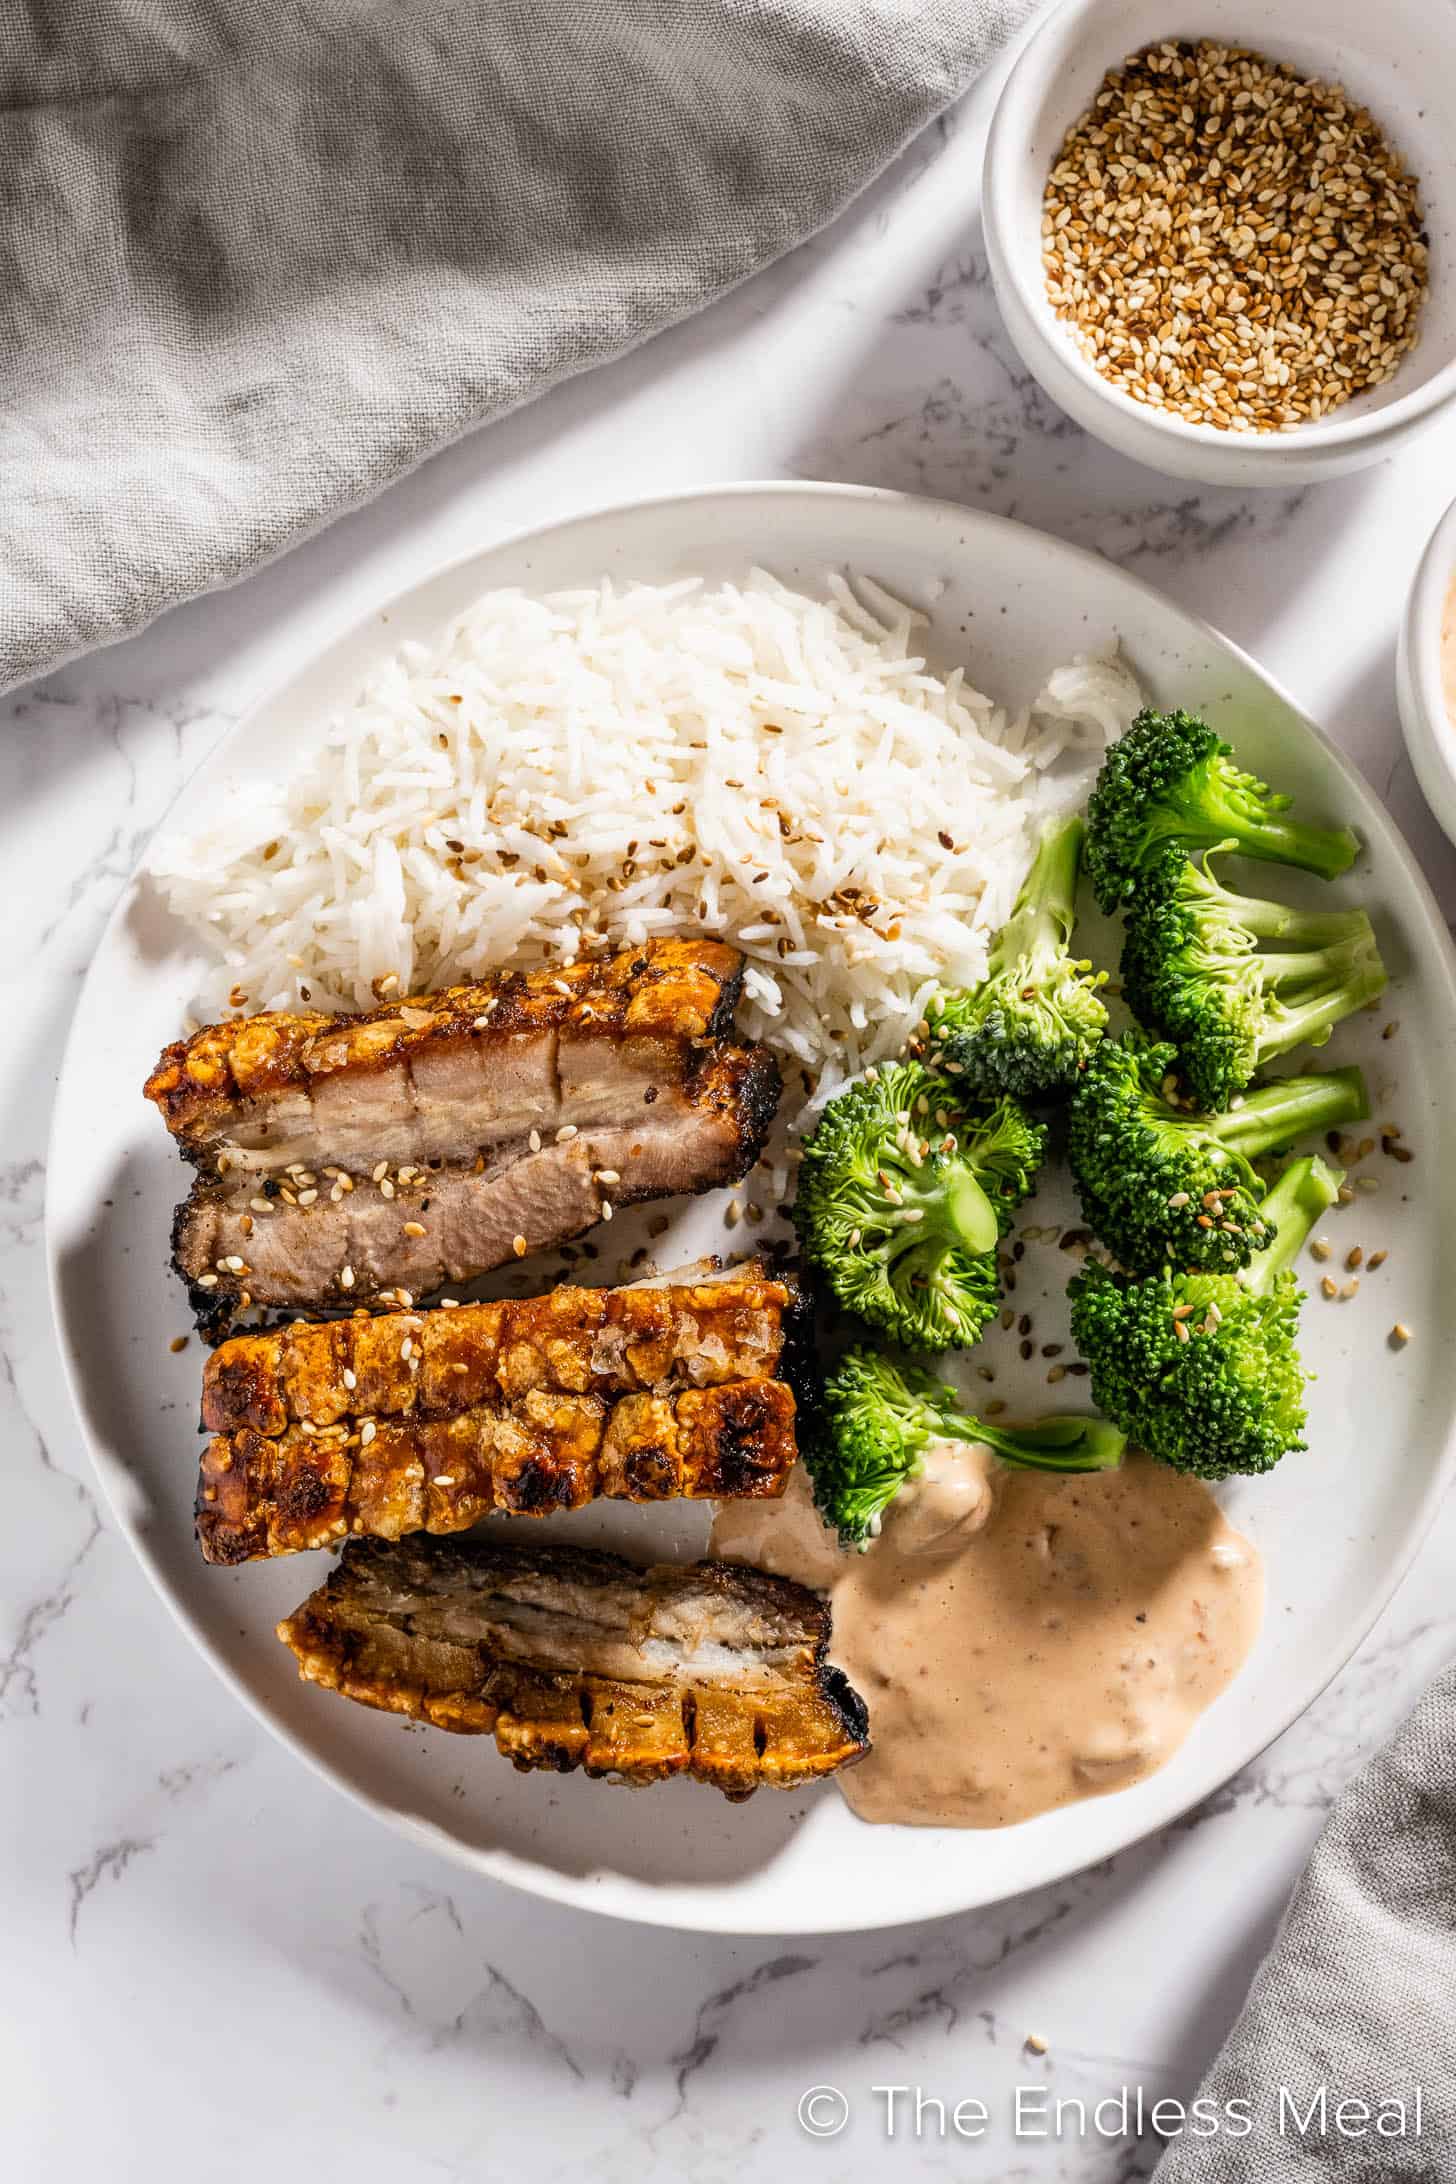 Slices of Maple Glazed Pork Belly on a plate with rice and broccoli